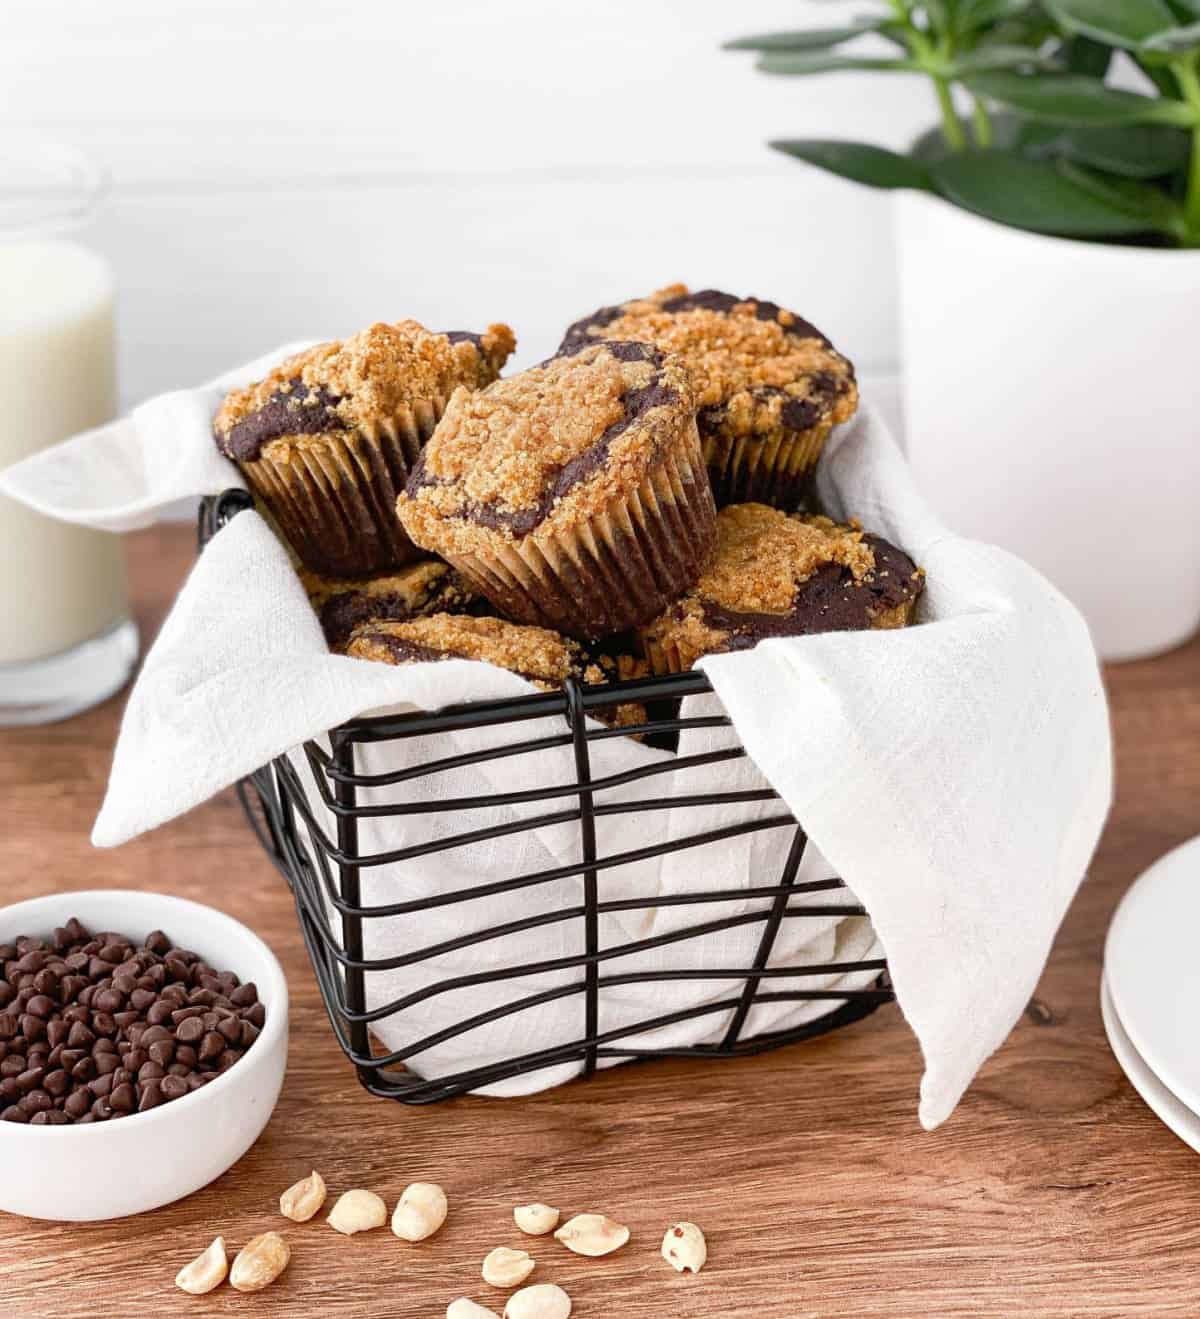 Basket of Chocolate Peanut Butter Muffins.